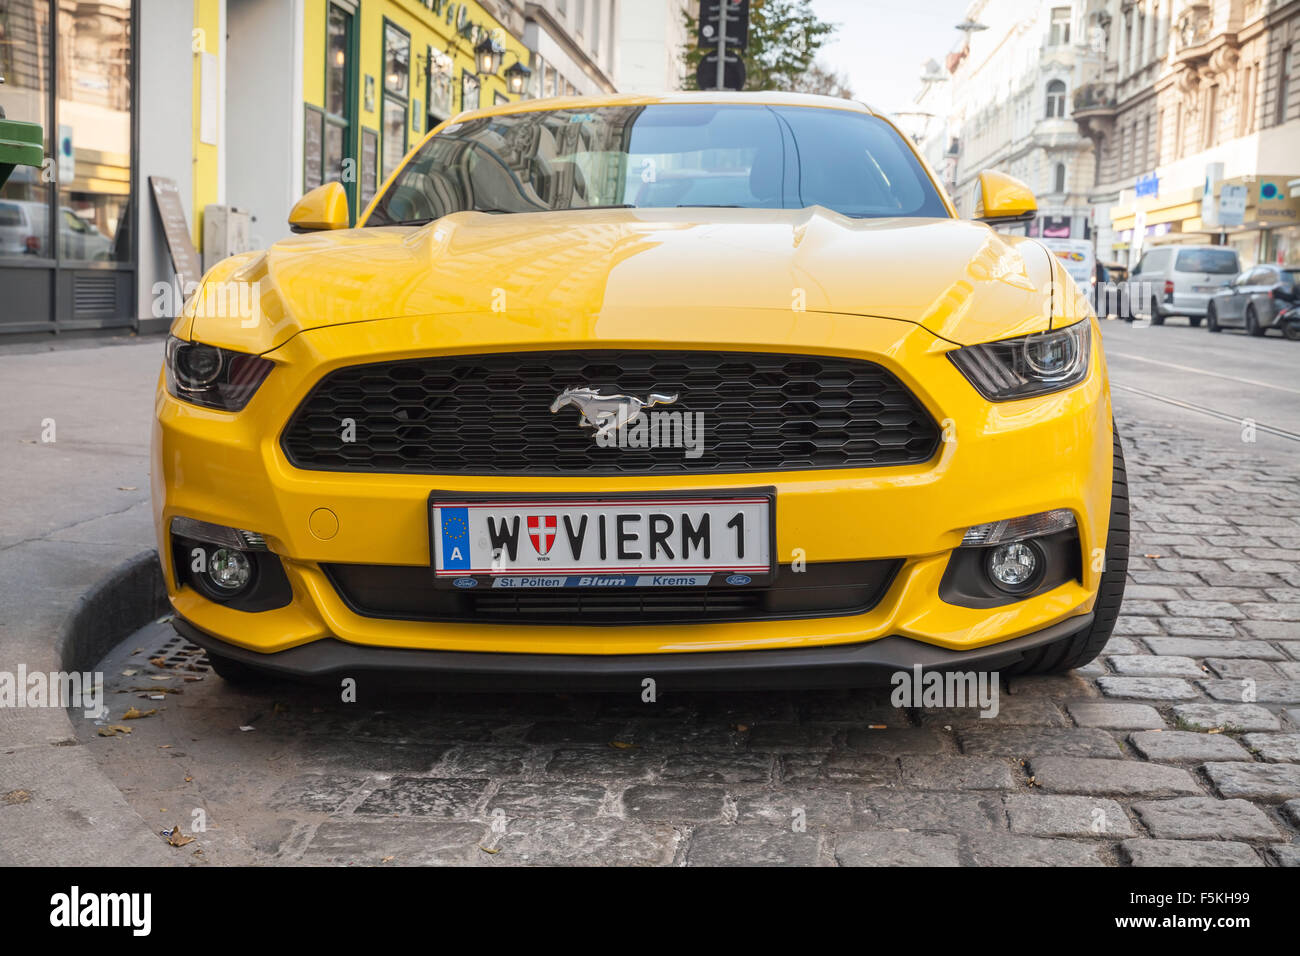 Vienna, Austria - November 4, 2015: Bright yellow Ford Mustang 2015 car stands on the city street, closeup front view Stock Photo